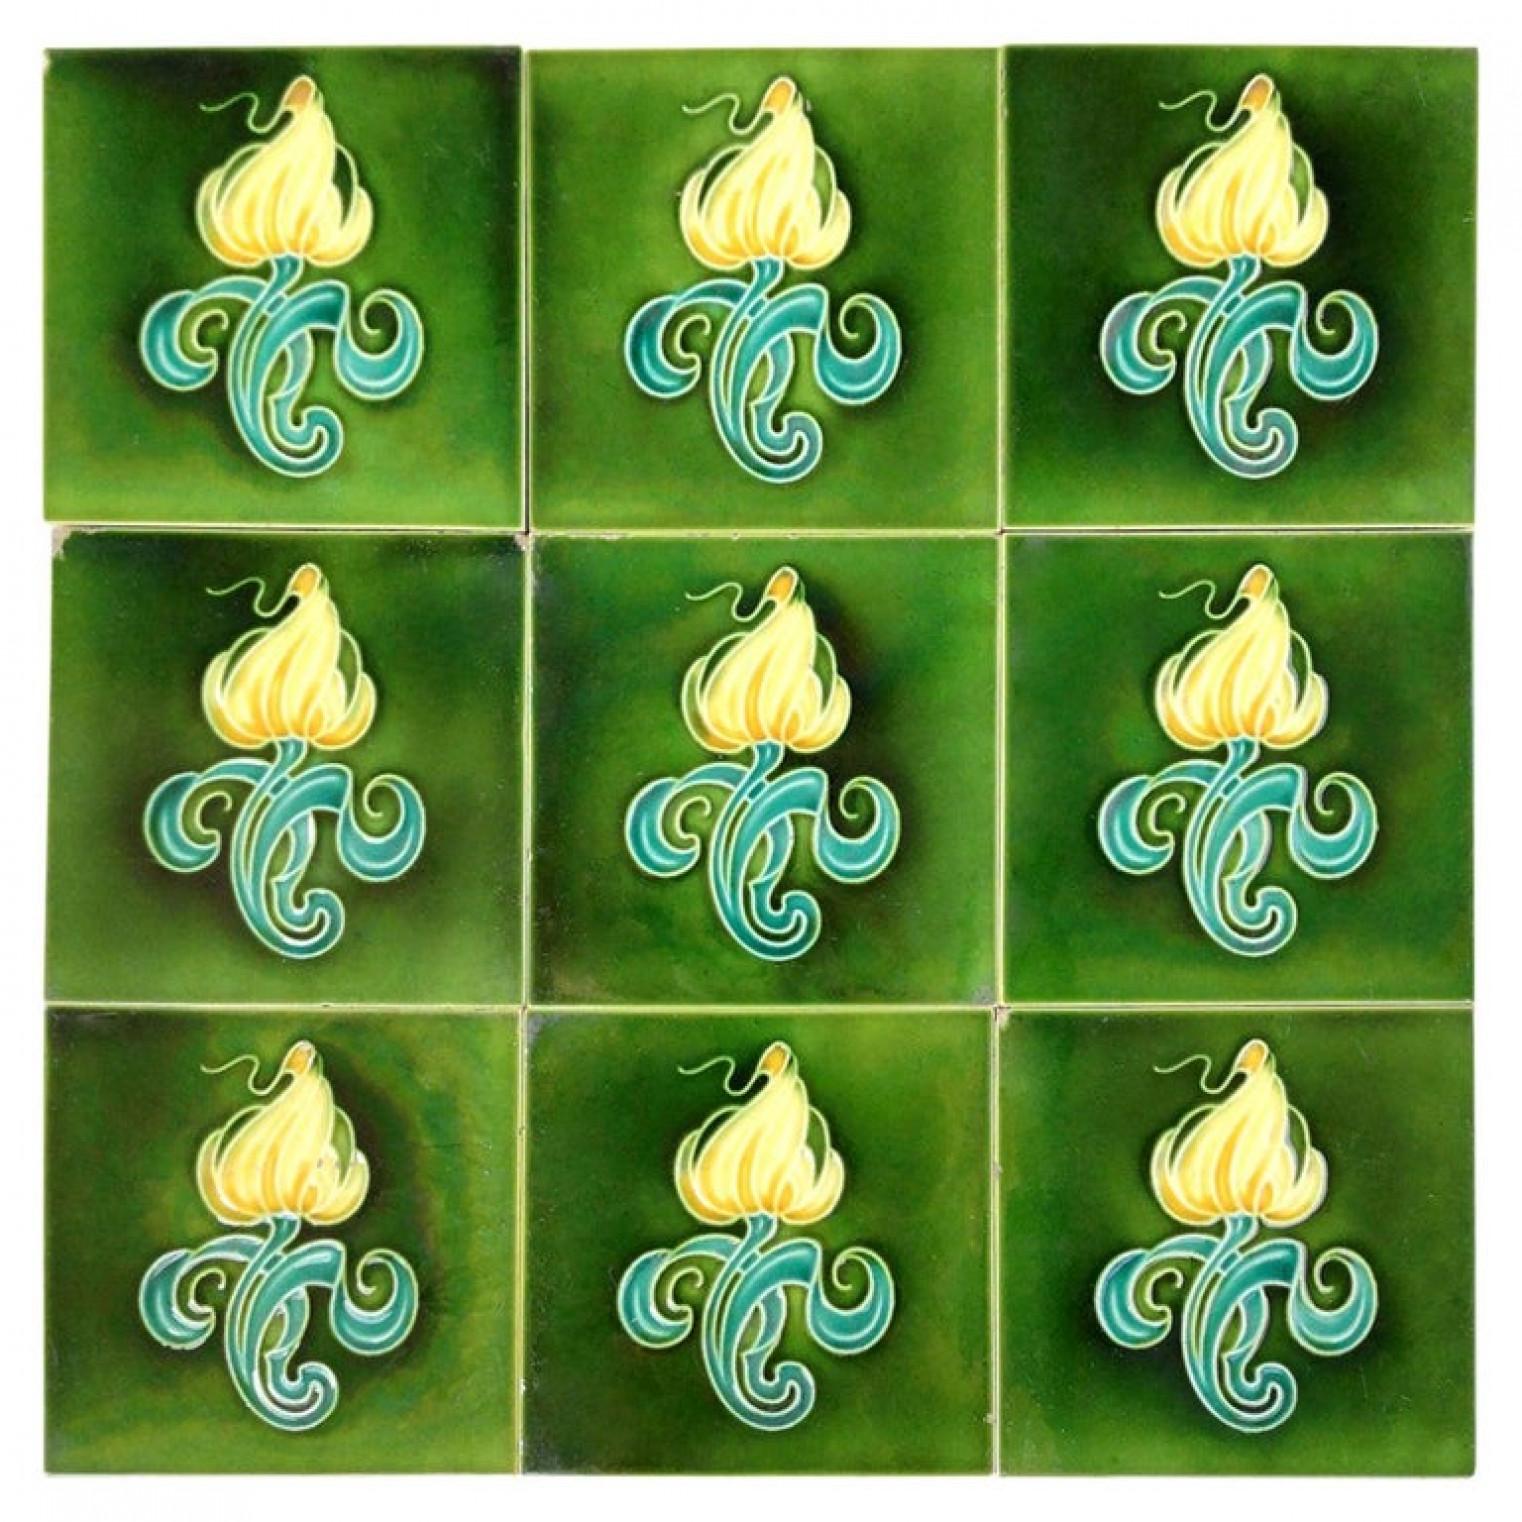 10 Art Nouveau ceramic tiles by Gilliot Fabrieken Hemiksem, Belgium, circa 1930. Beautiful original antique tiles with a flower in relief. The tile shows a yellow and turquoise flower on a bright, green background. The glaze reflects an unique oil